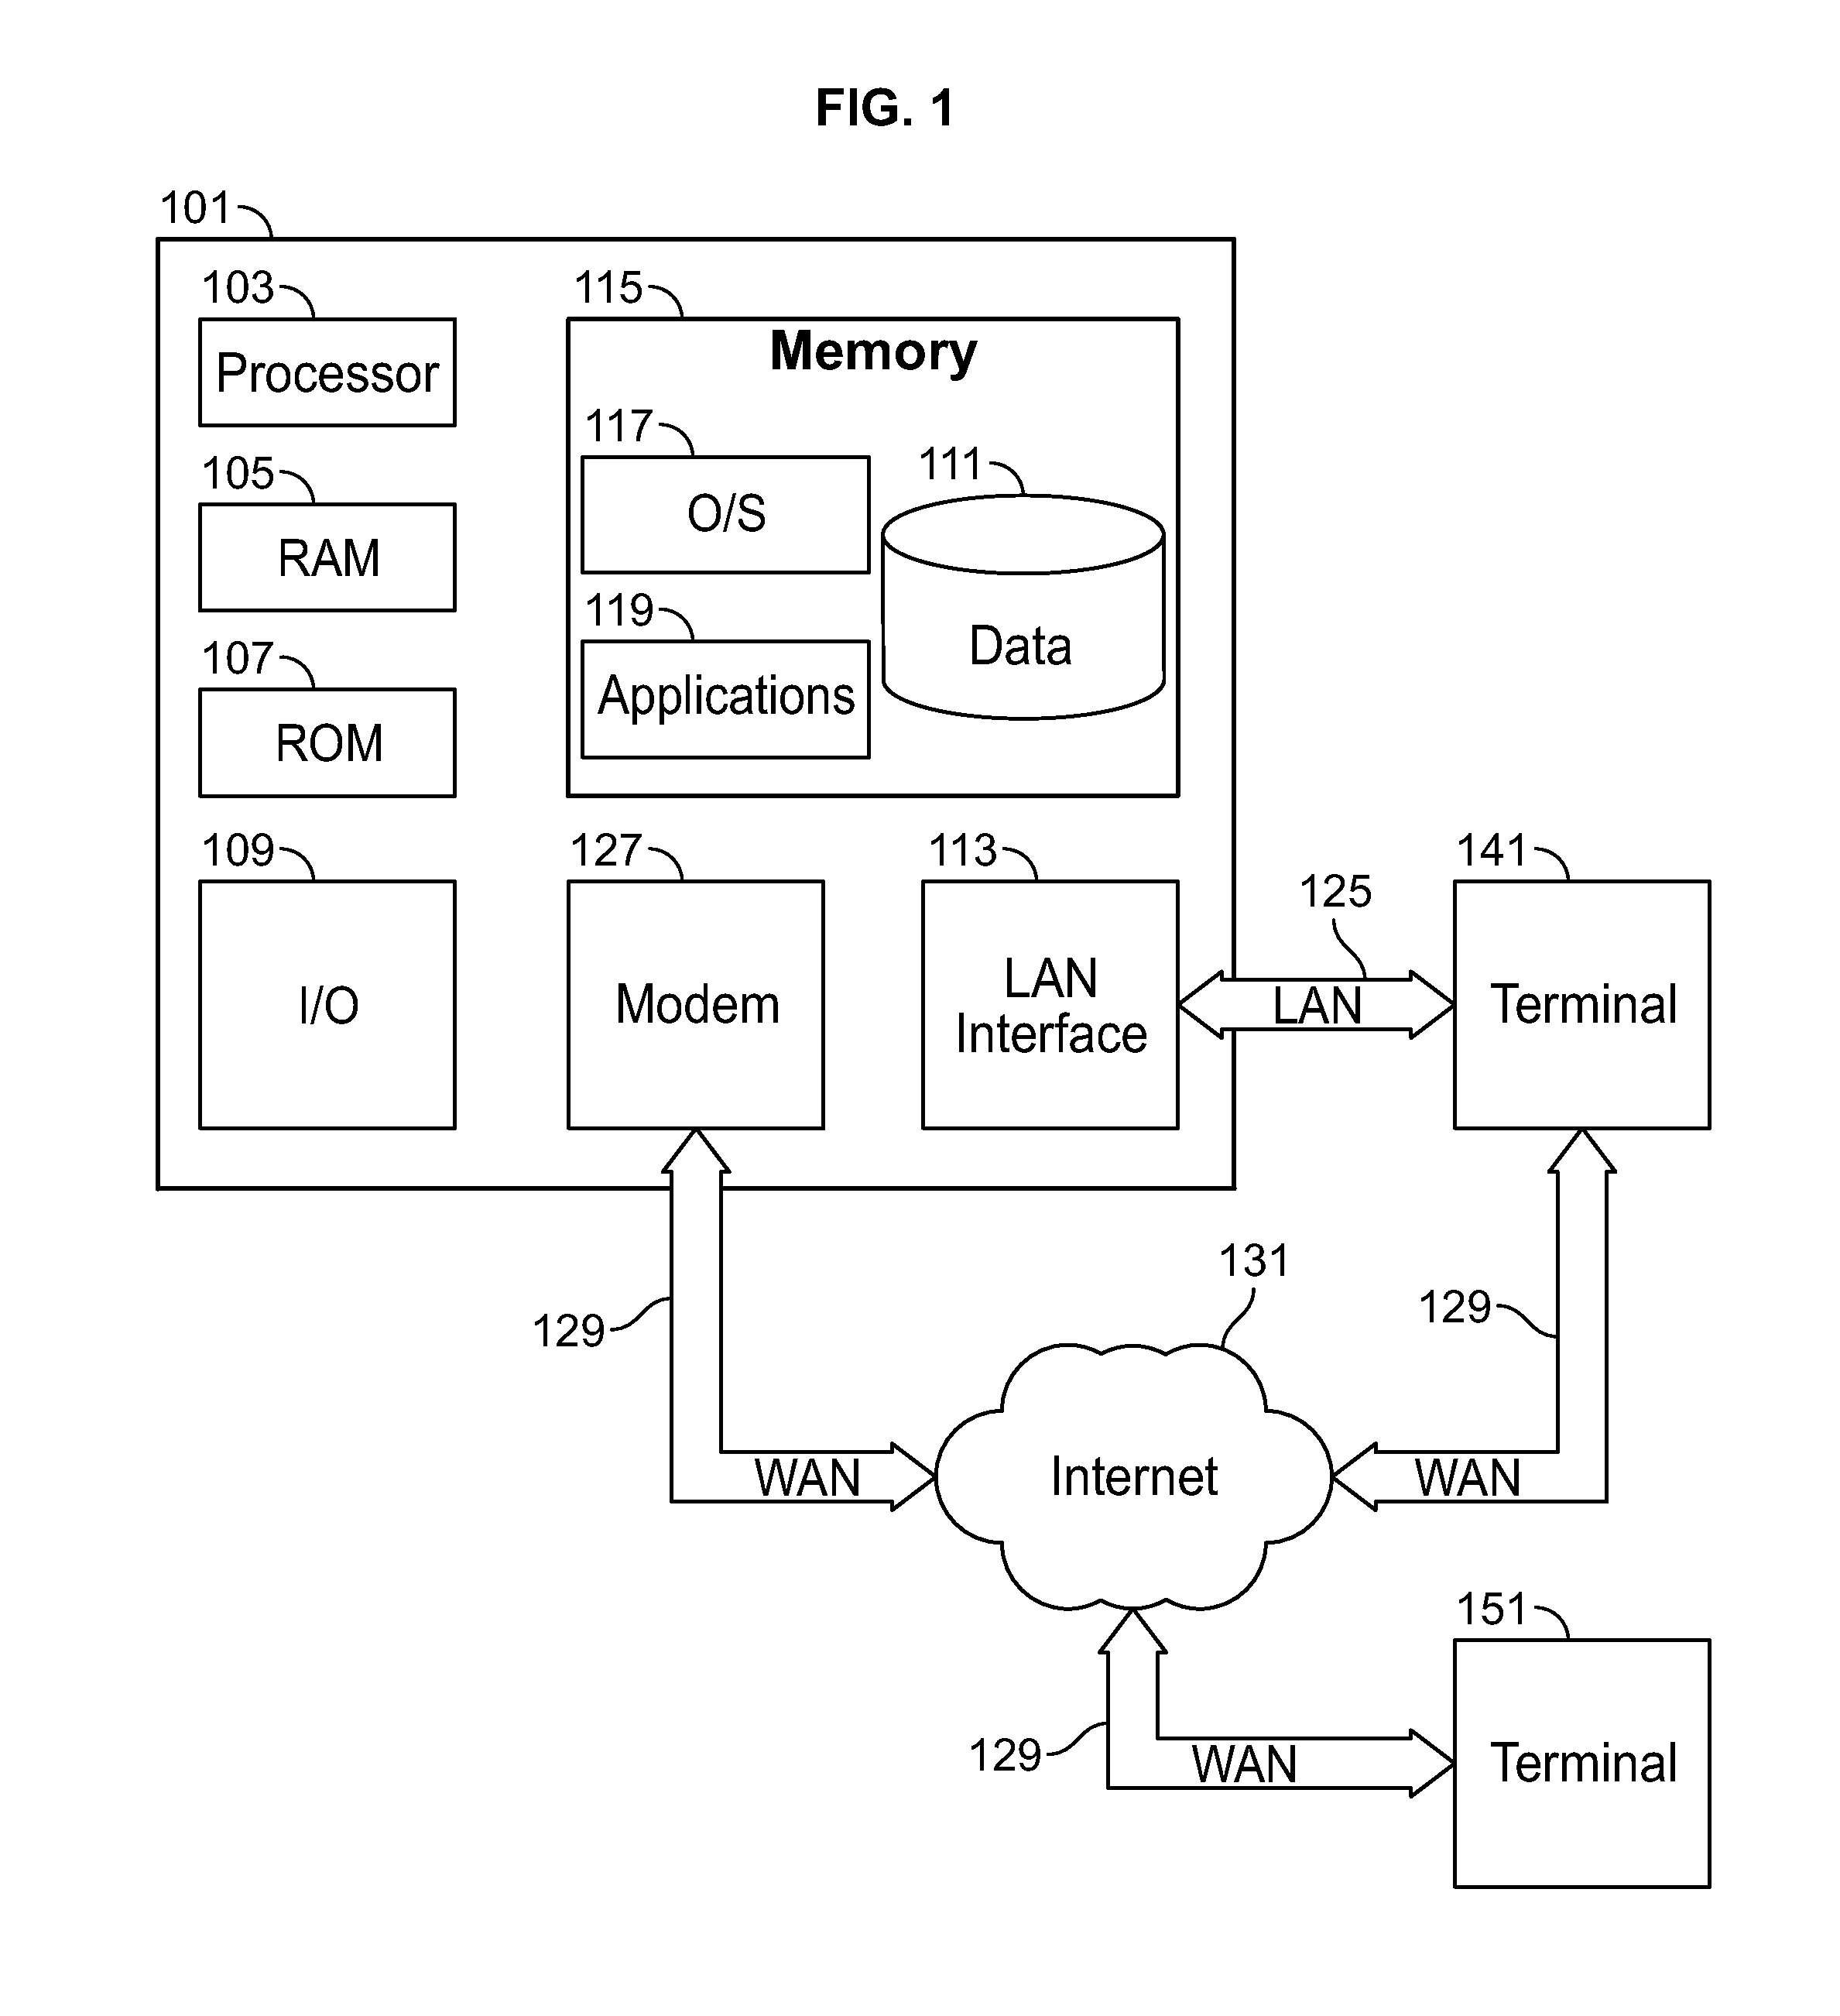 Multi-dimensional filter for threshold determination of claims filtering